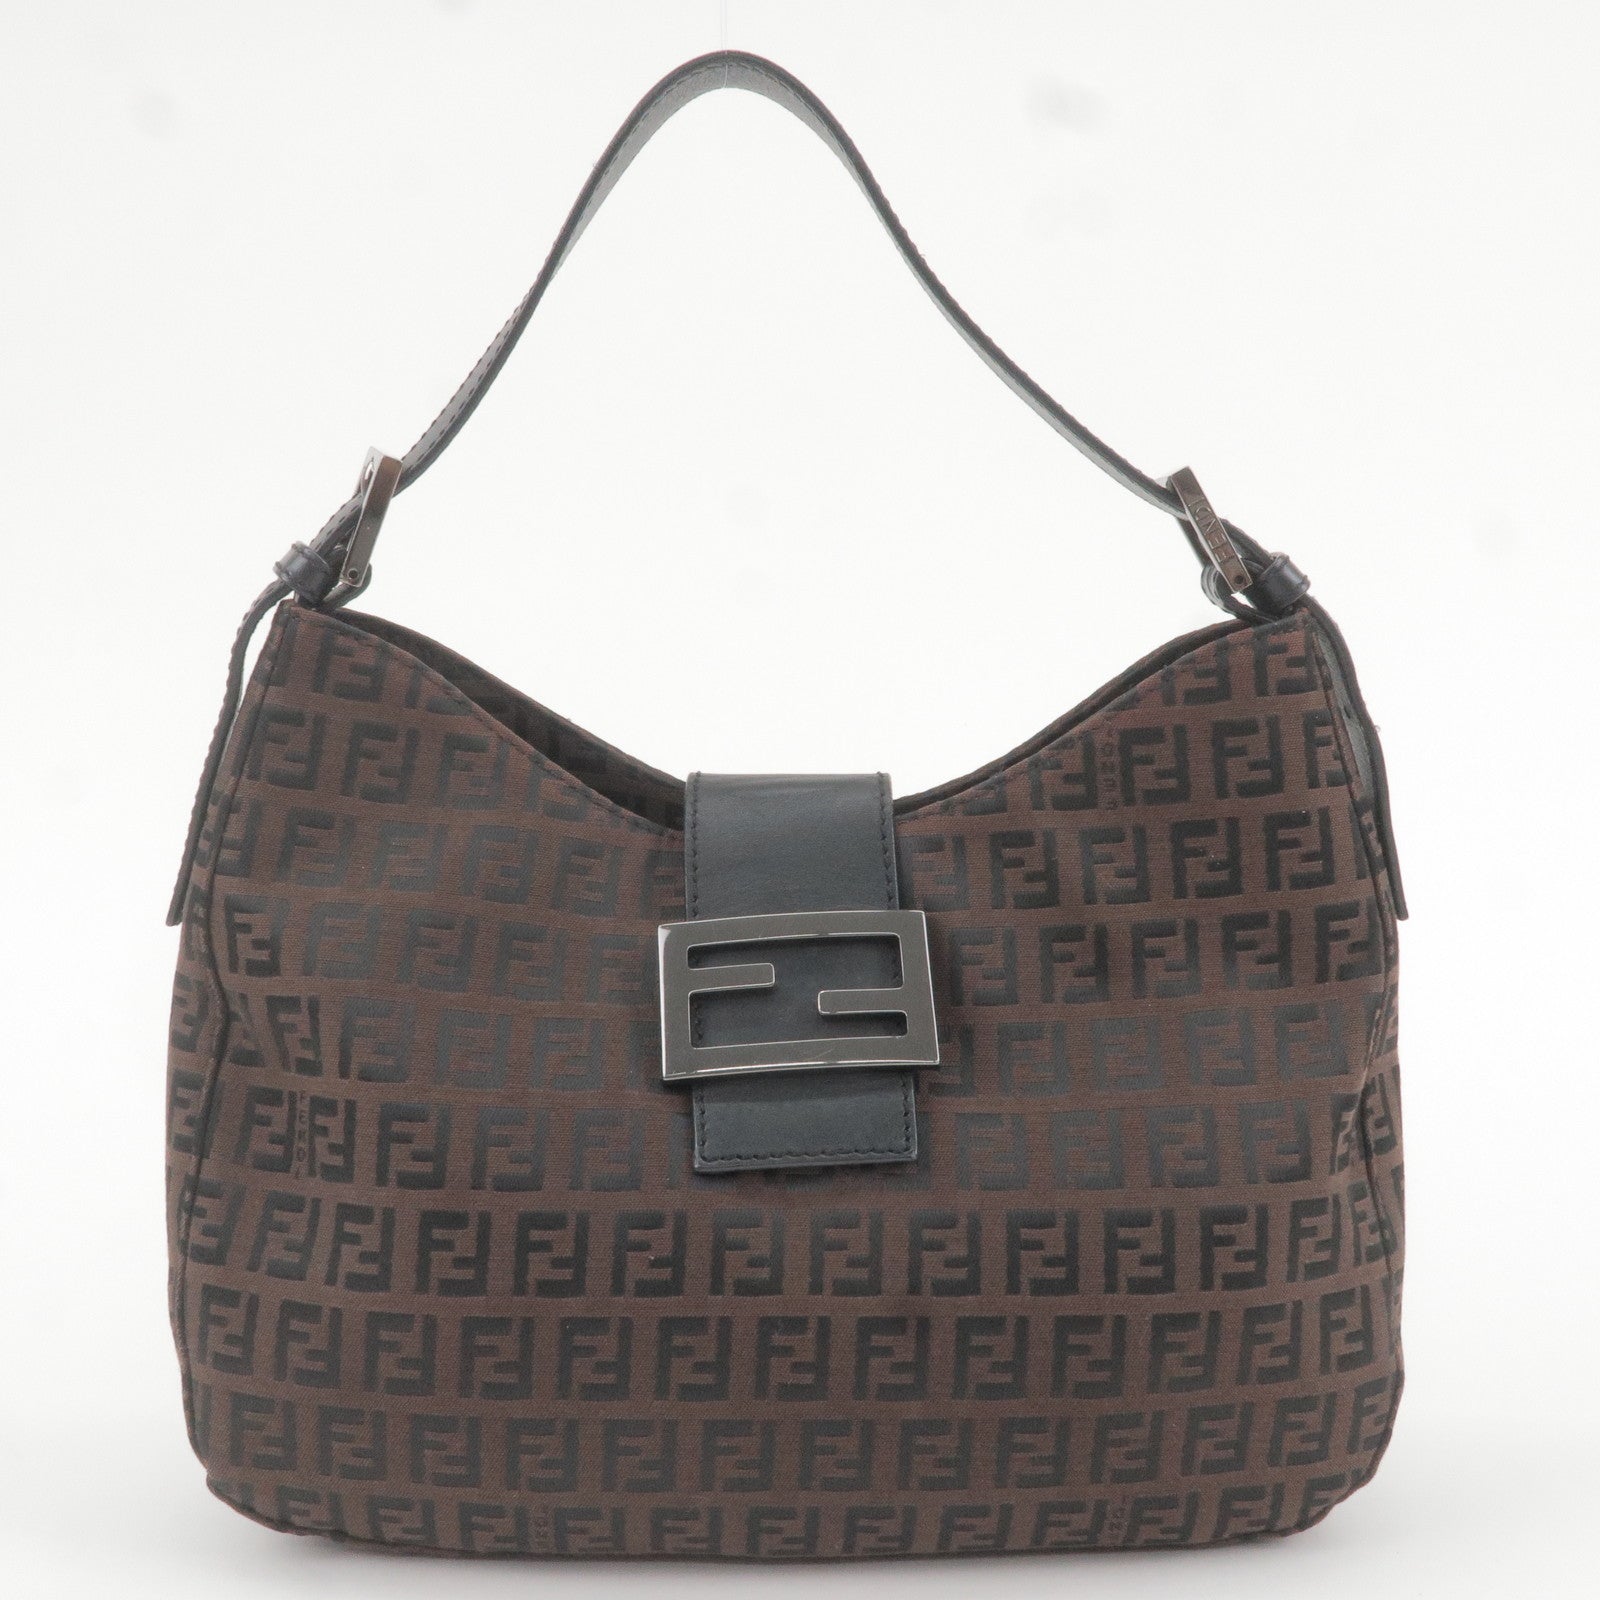 Fendi Brown Zucca Canvas and Red Leather Selleria Boston Bag